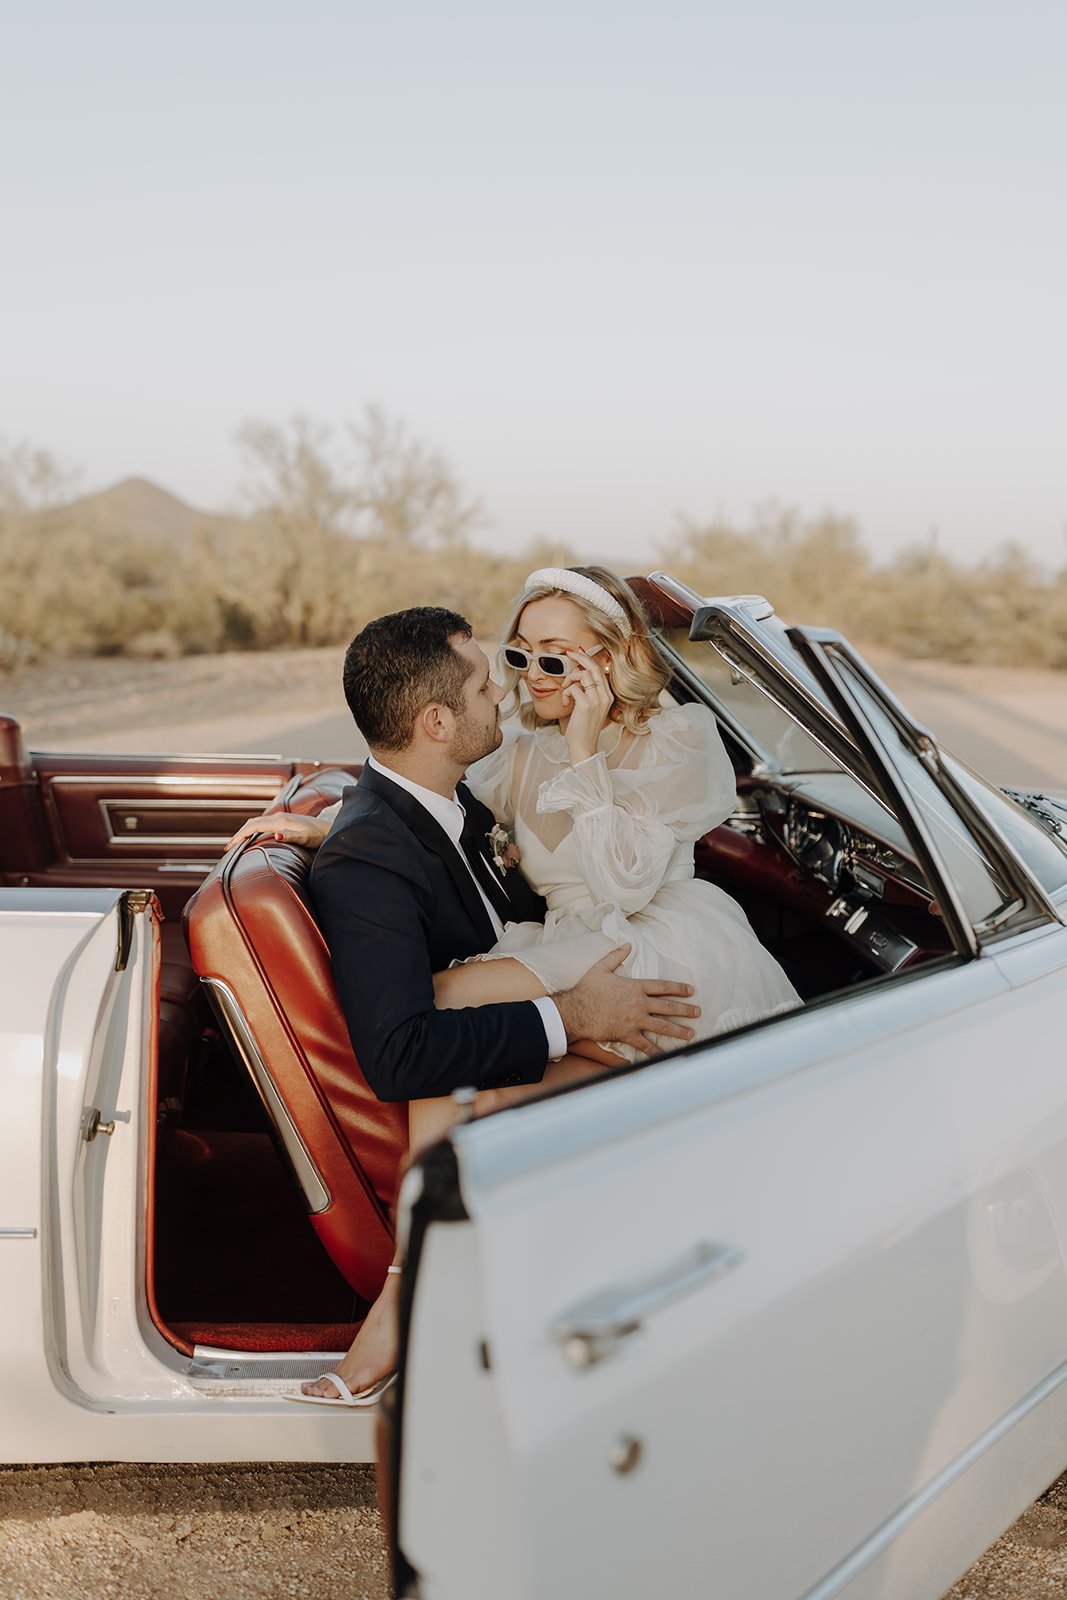 Bride sitting on groom's lap in vintage white convertible